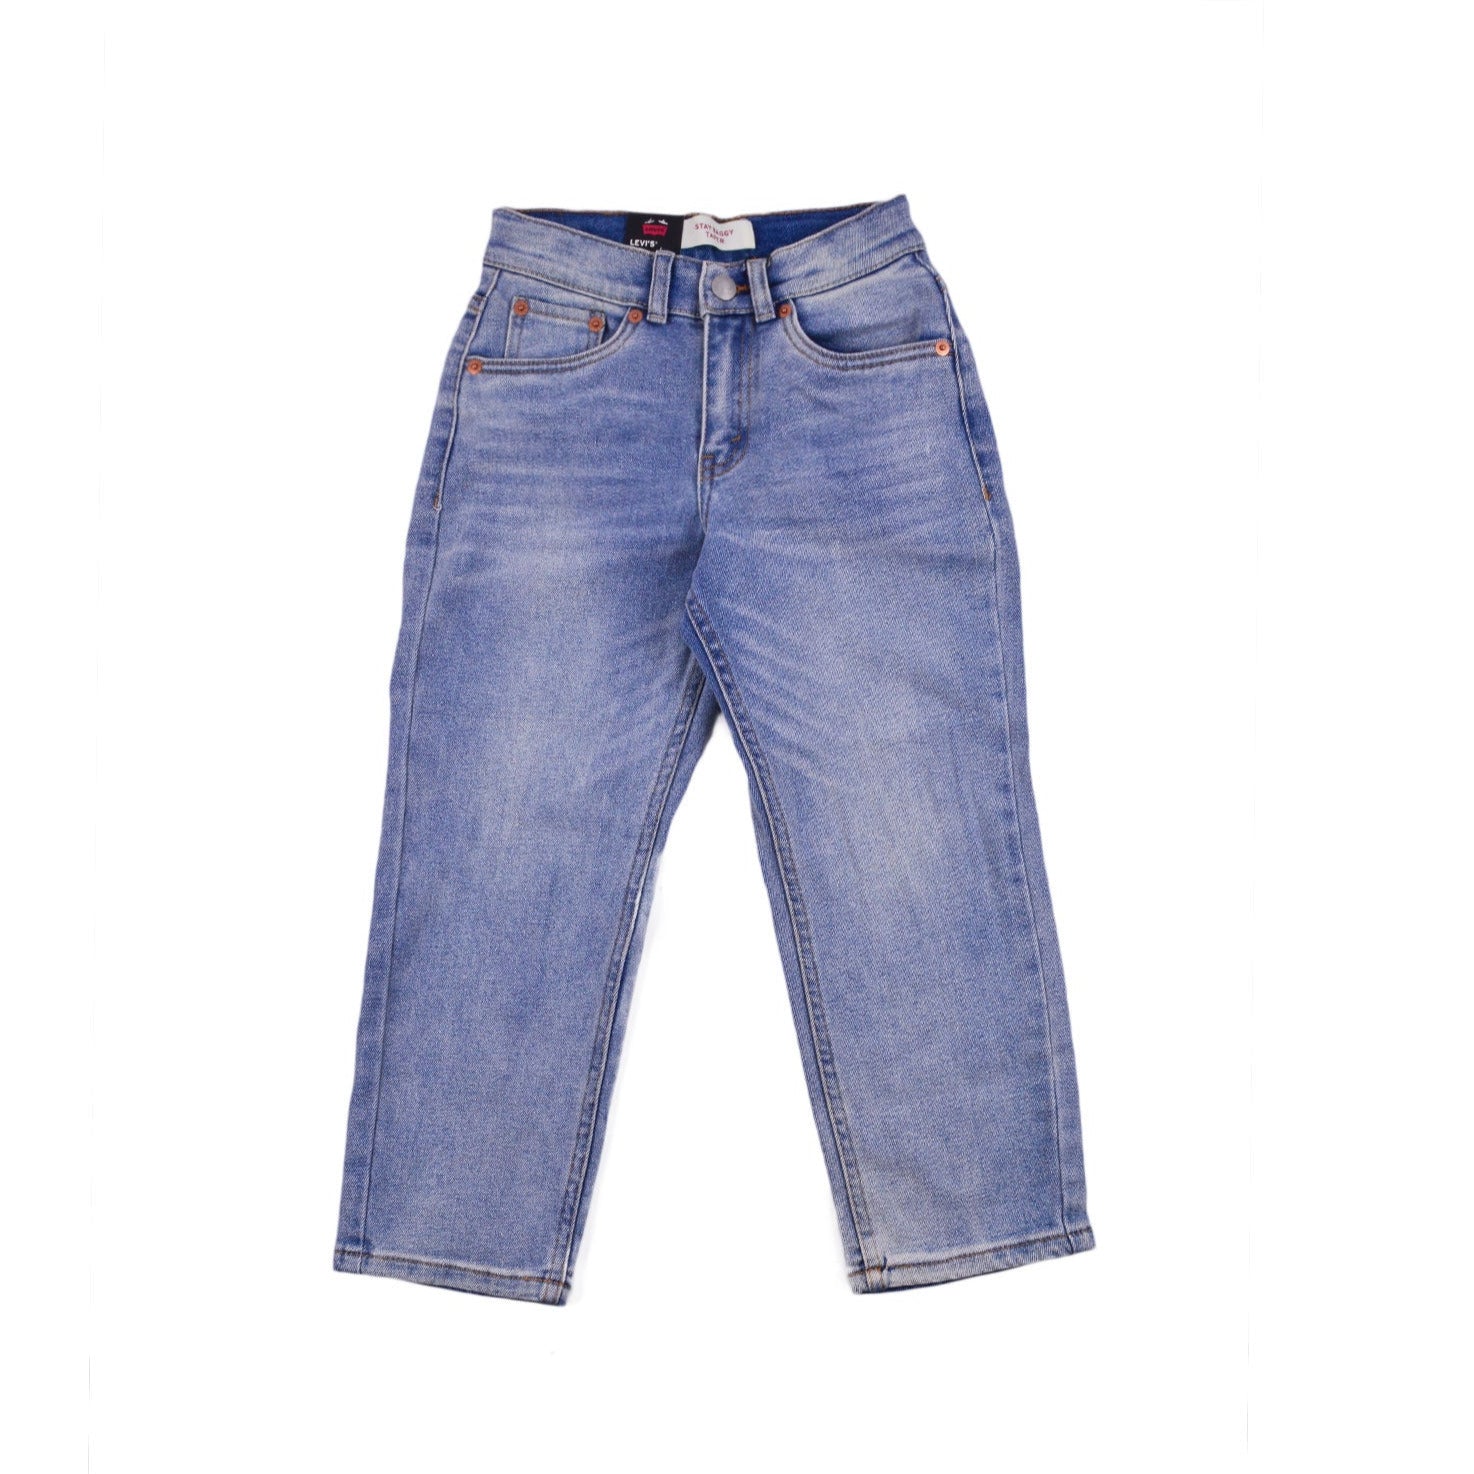 Levi&#39;s Kids jeans trousers for boys and girls 8EH870-L4Y 9EH870-L4Y blue stone